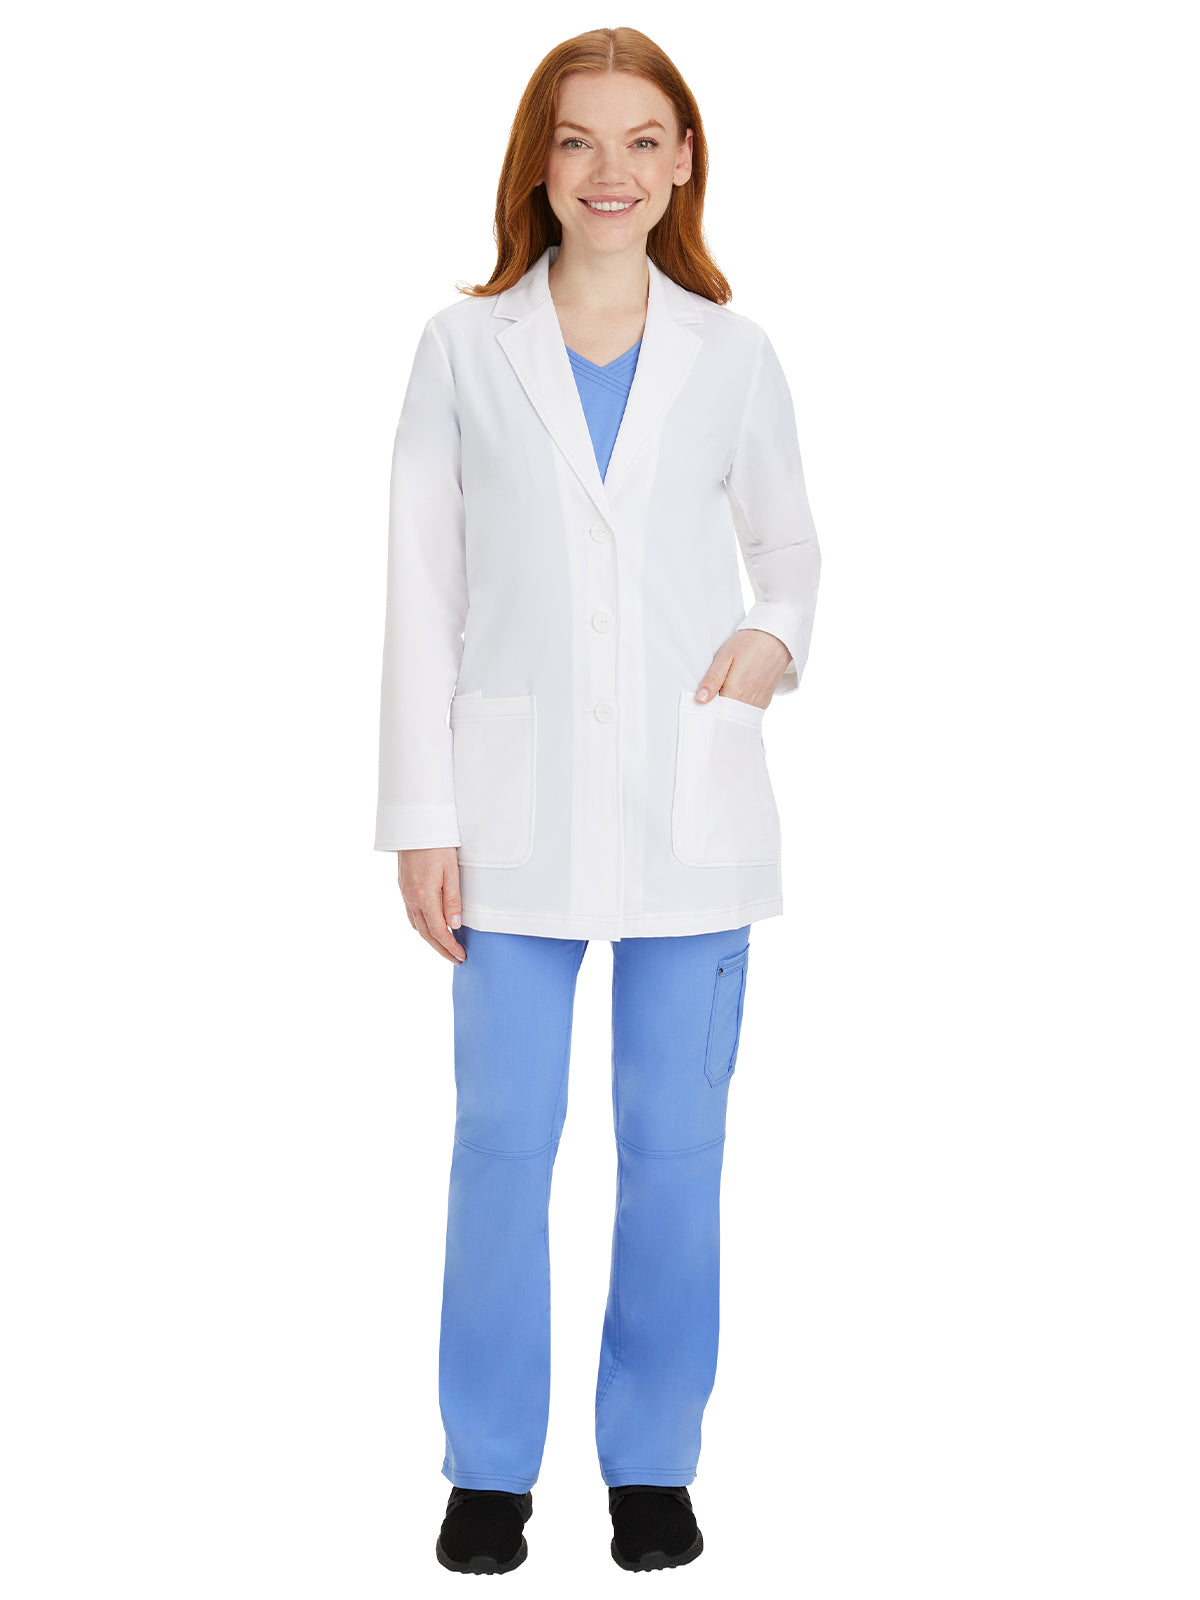 Women's Notched Collar Lab Coat - 5053 - White